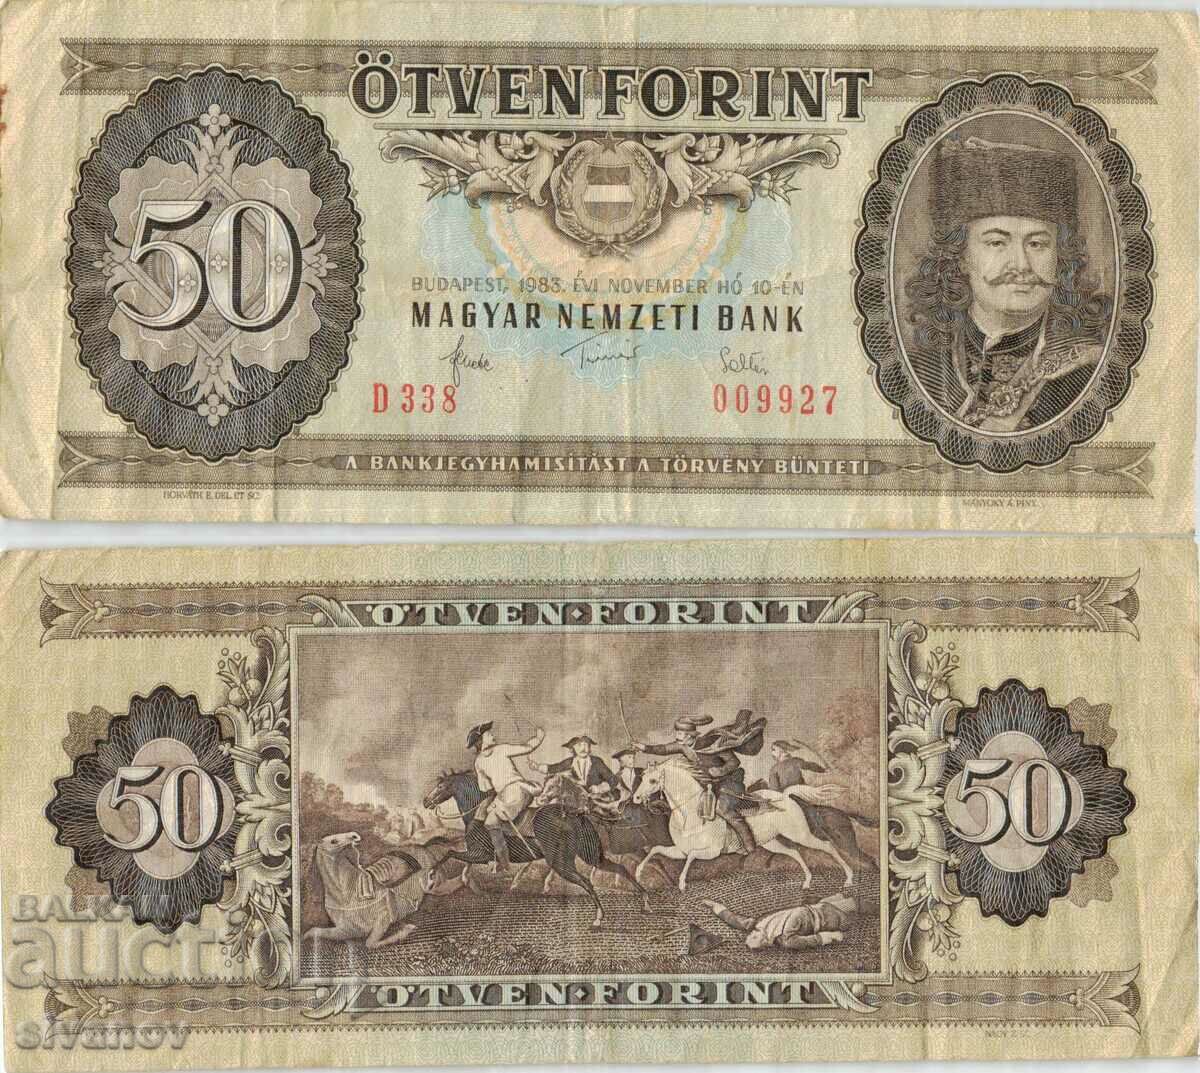 Hungary 50 forint 1983 banknote #5203